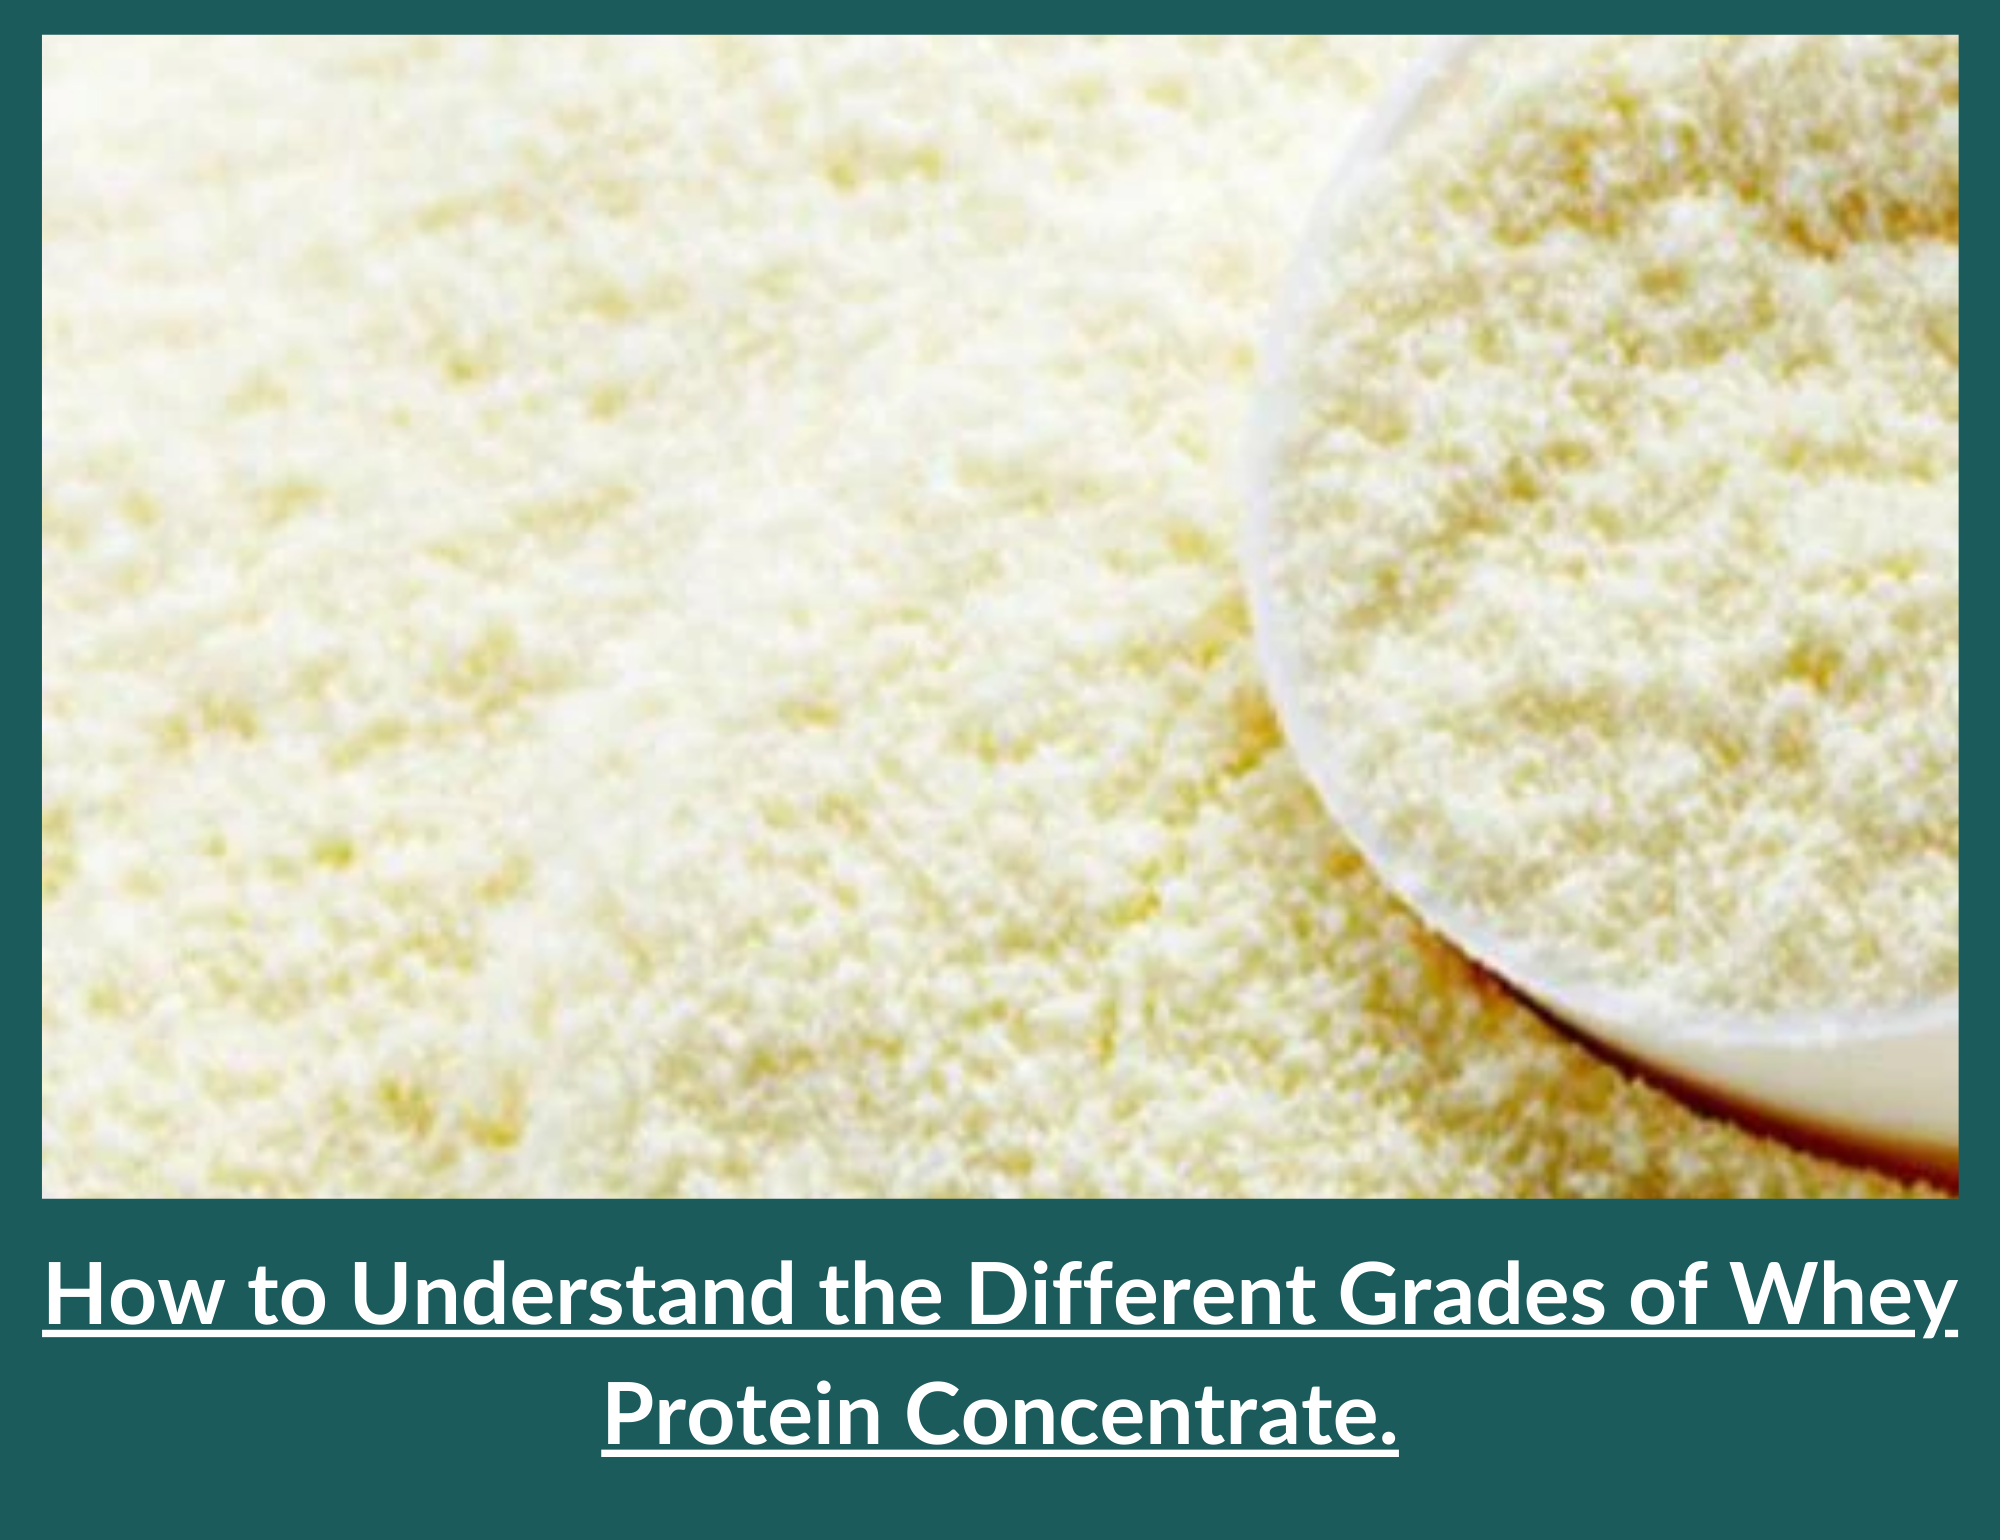 Grades of Whey Protein Concentrate